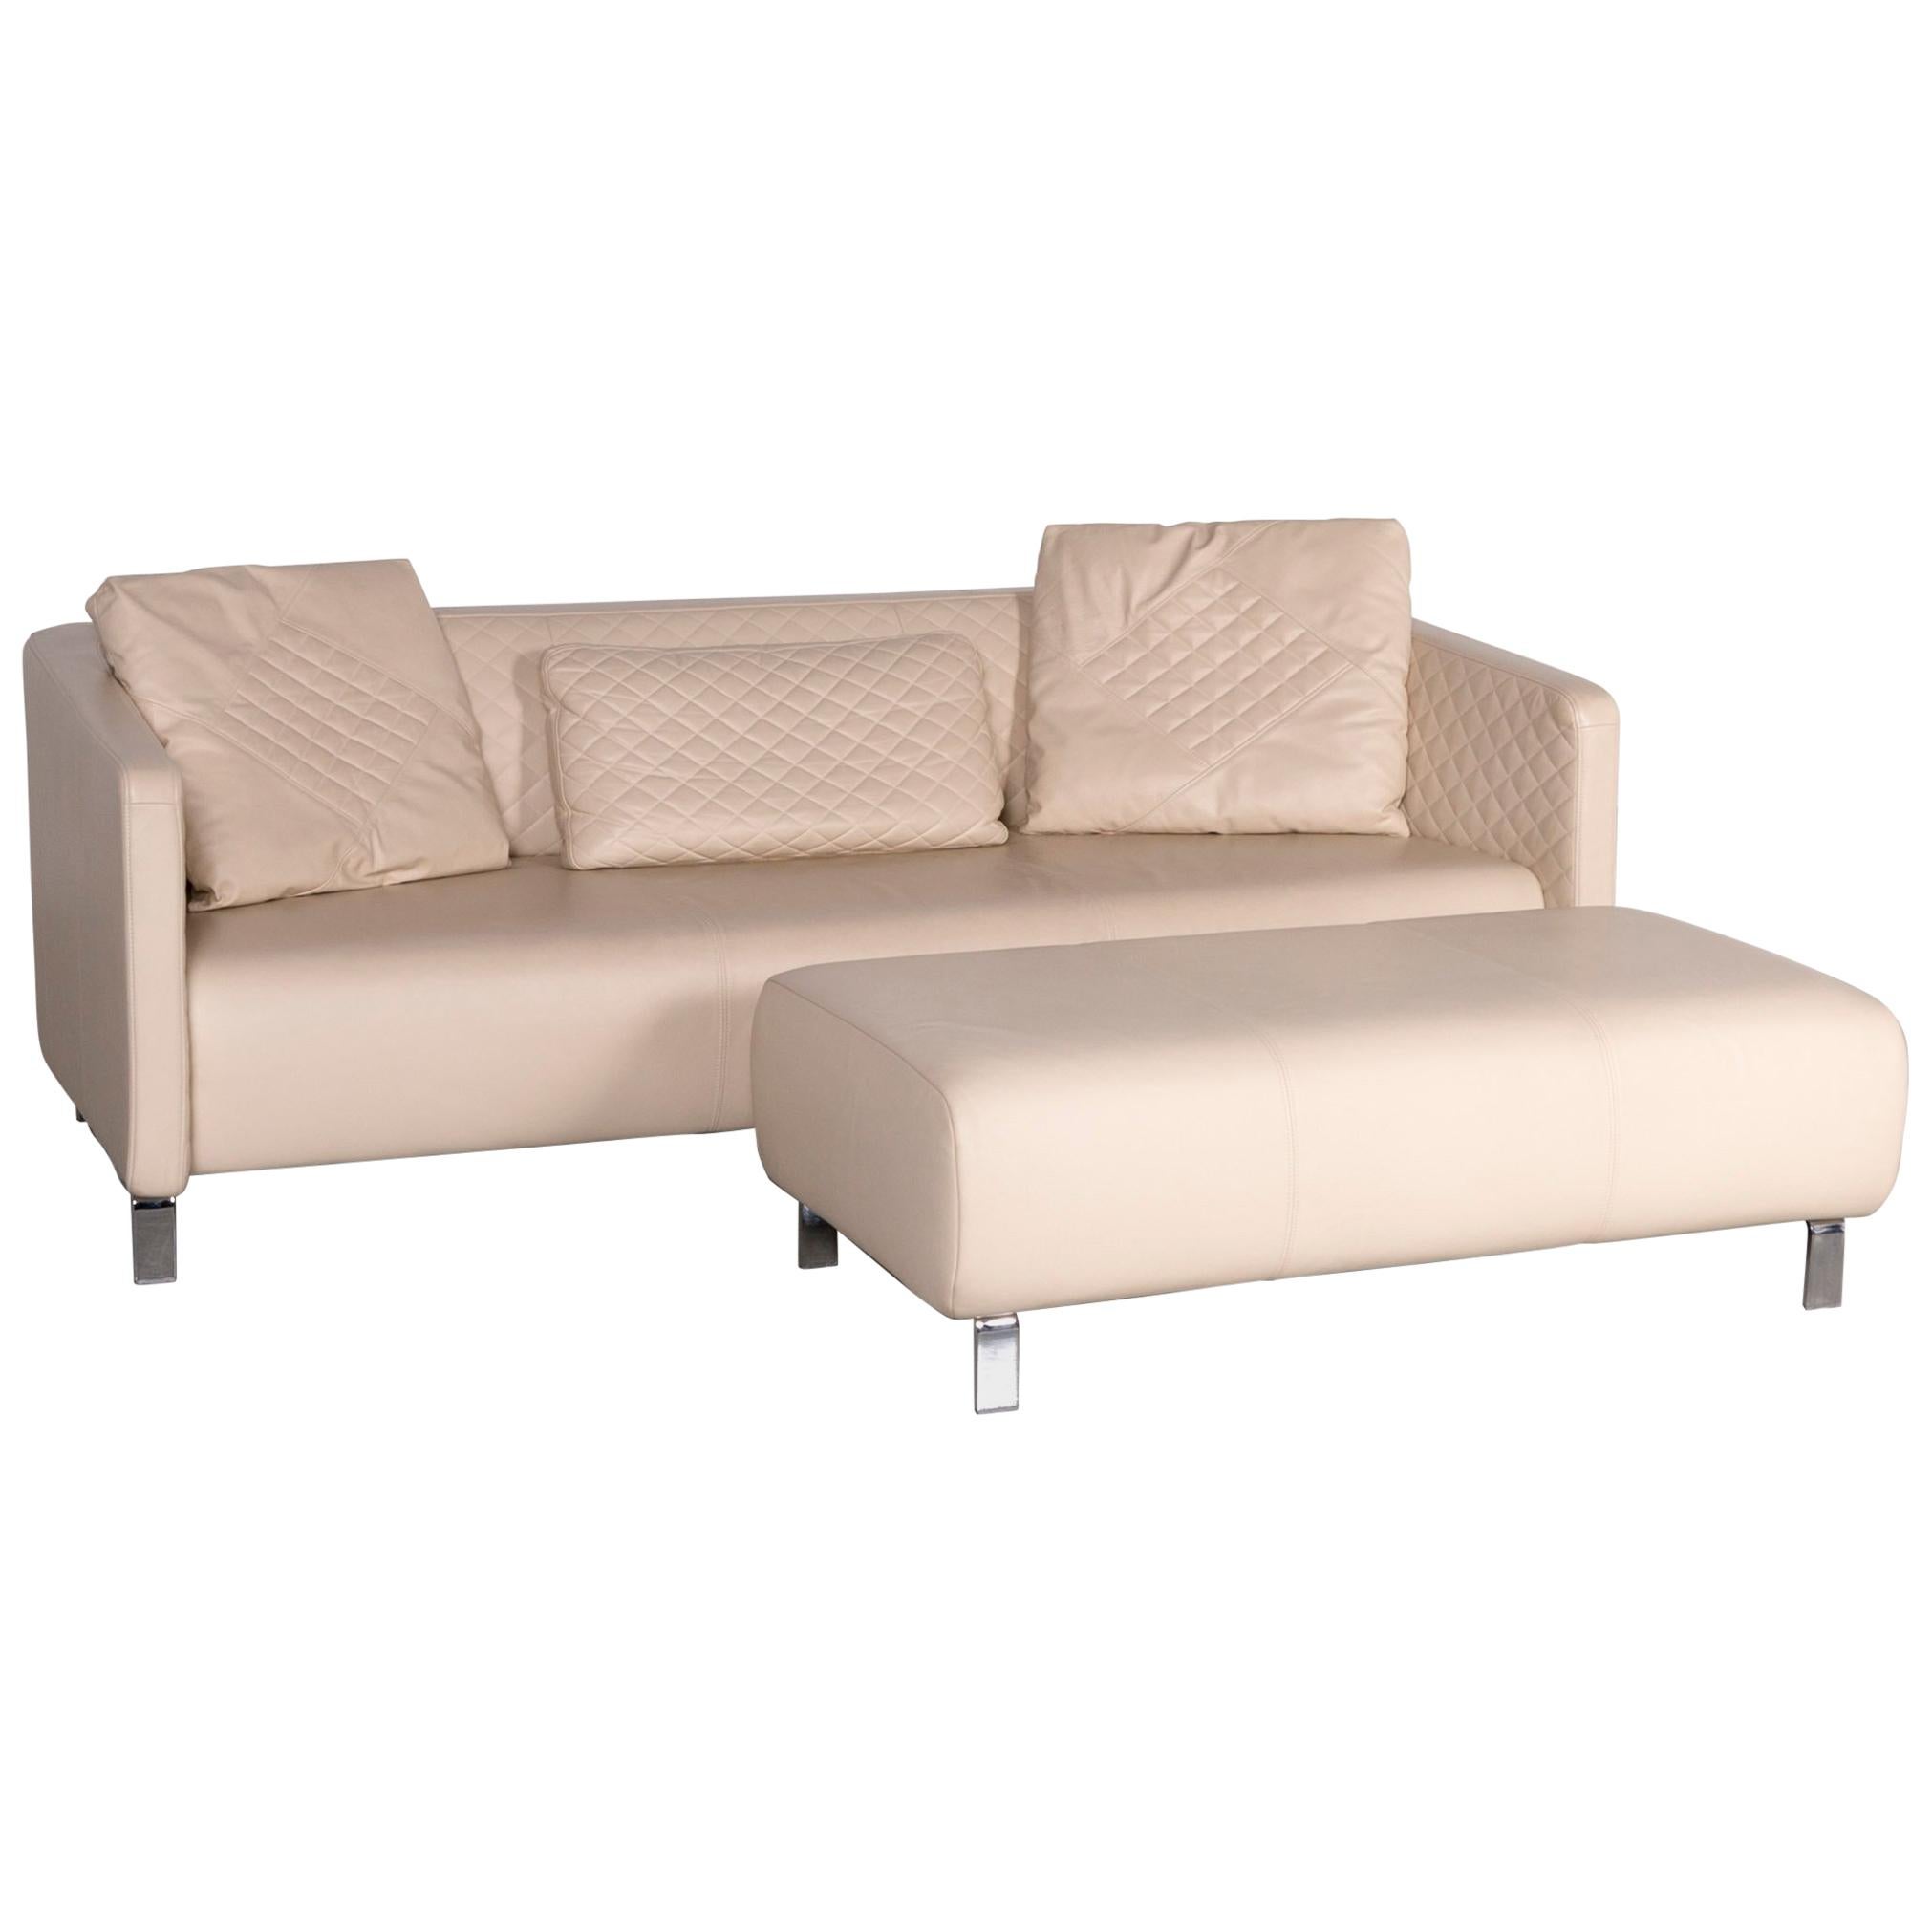 Rolf Benz 325 Designer Leather Sofa Footstool Set Beige Three-Seat Couch For Sale